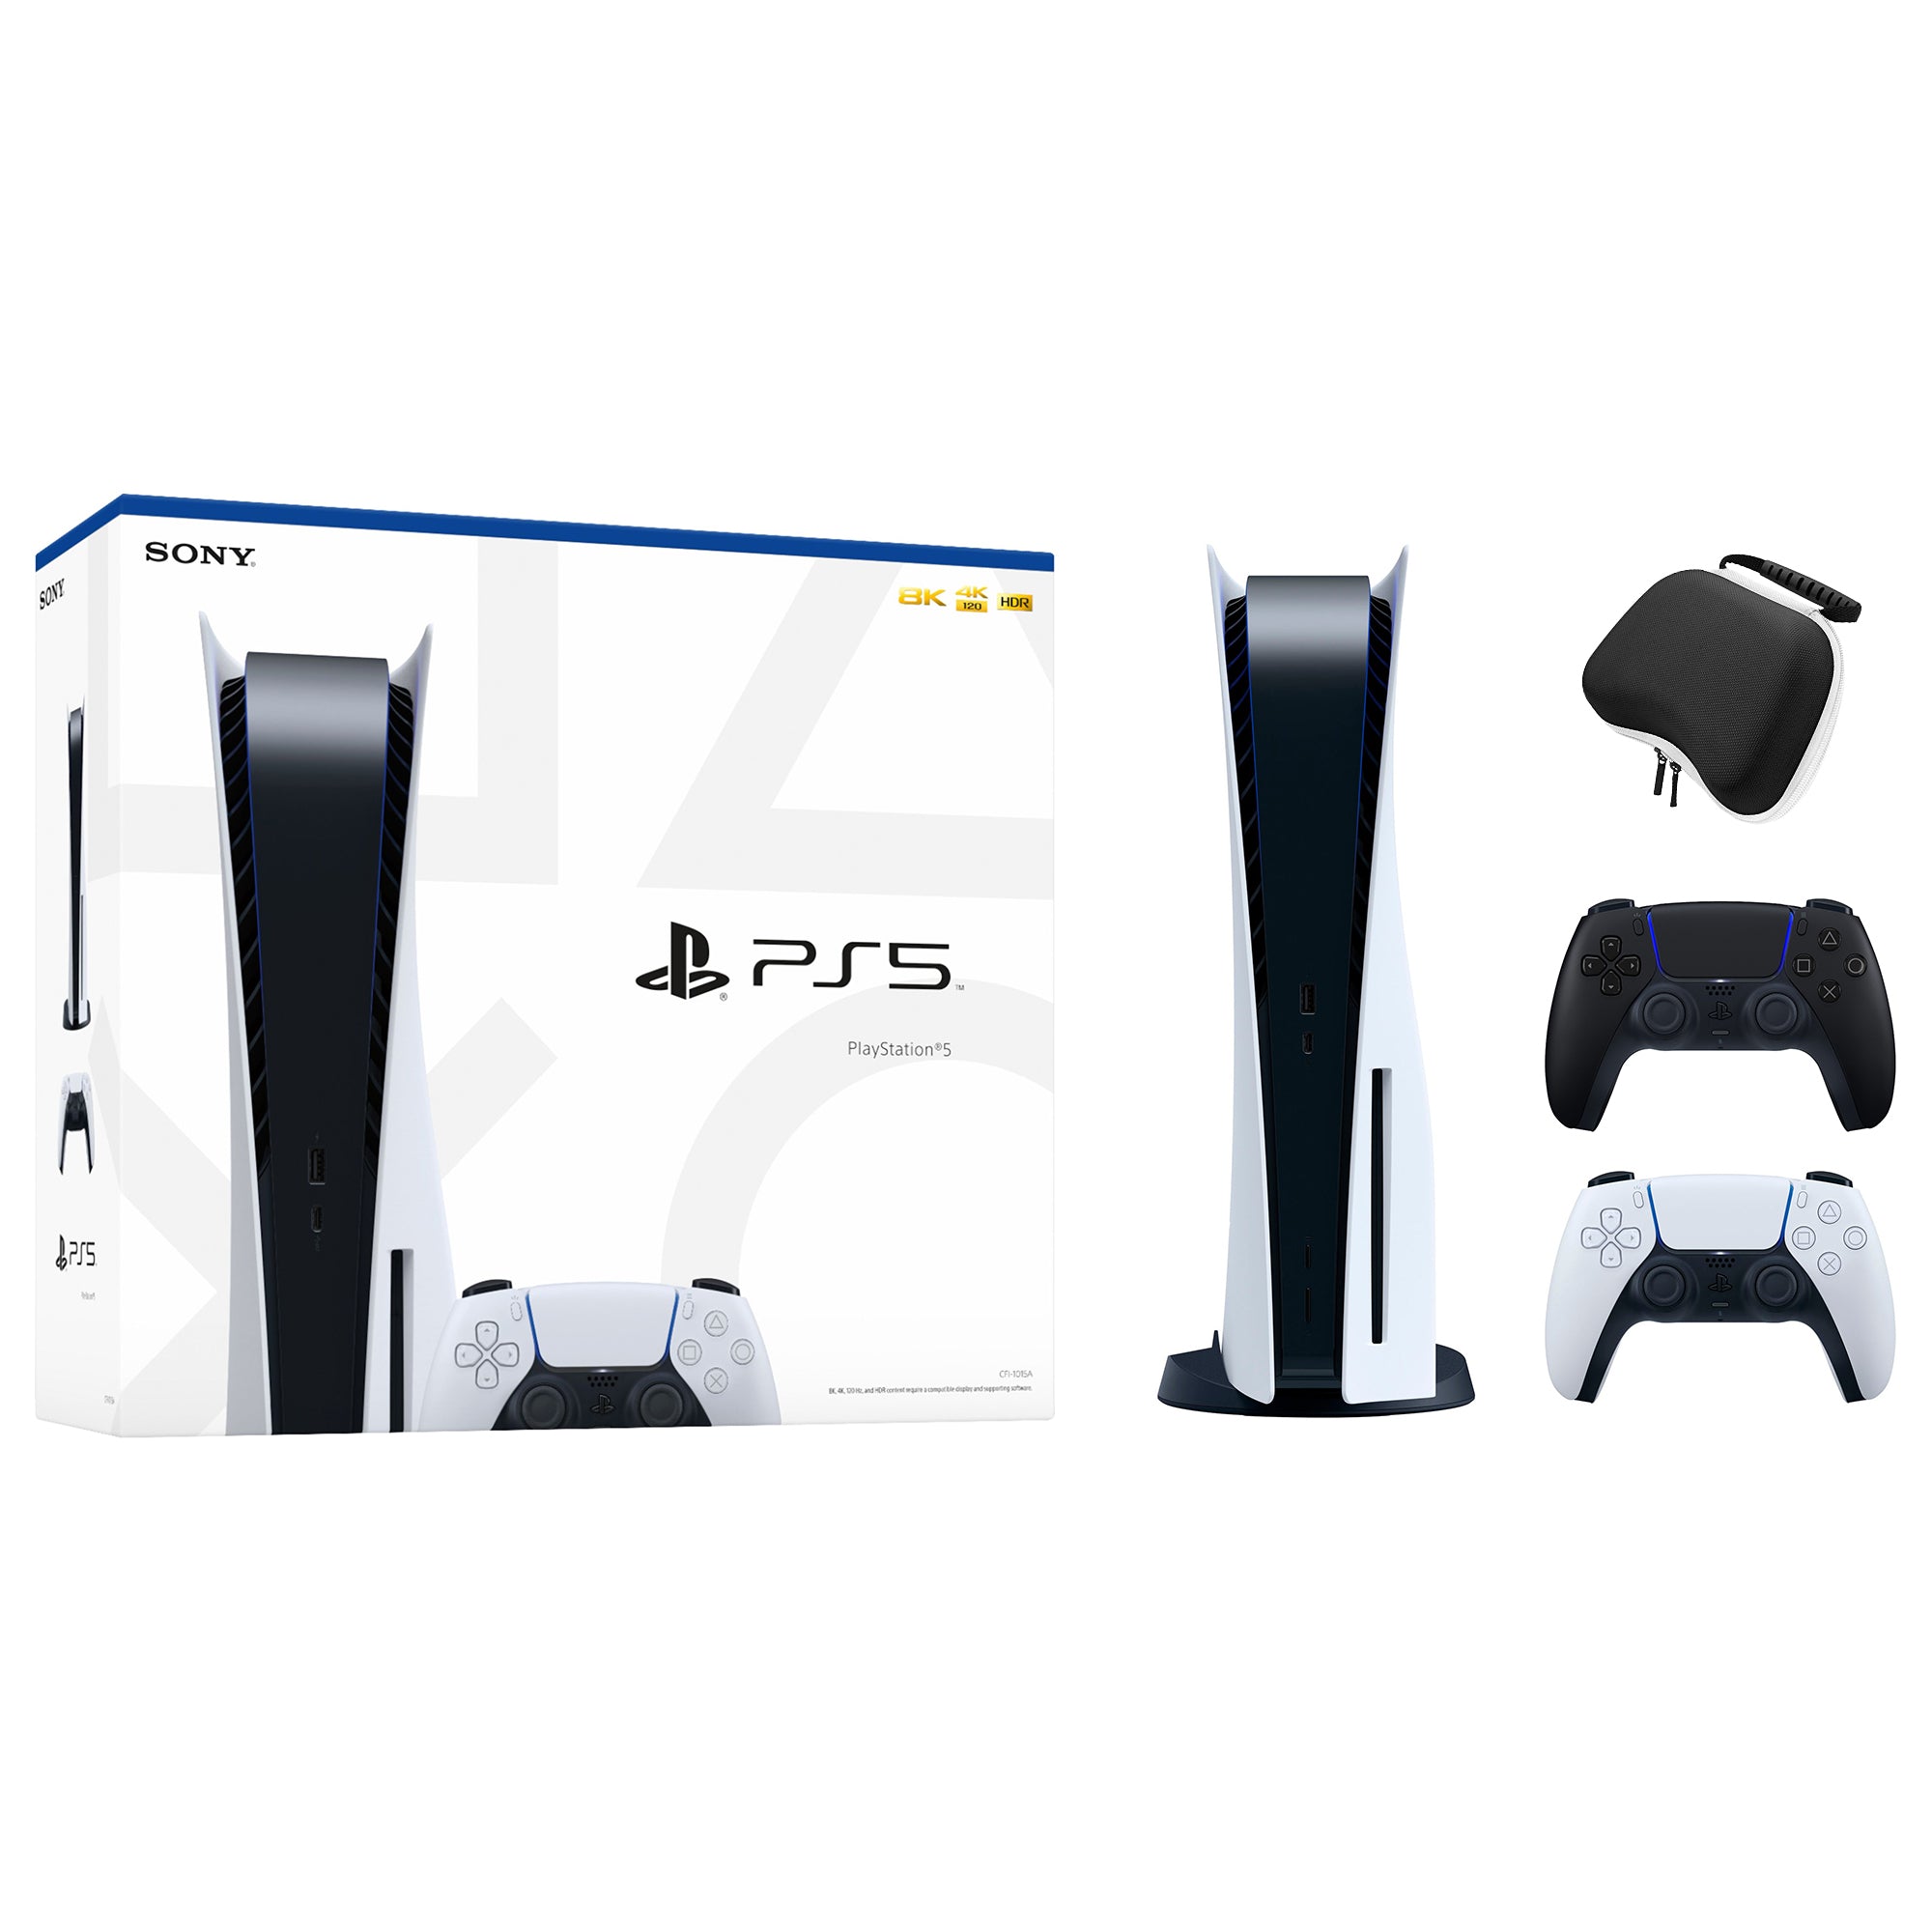 PlayStation 5 Disc Edition with Two Controllers White and Midnight Black DualSense and Mytrix Hard Shell Protective Controller Case - PS5 Gaming Console